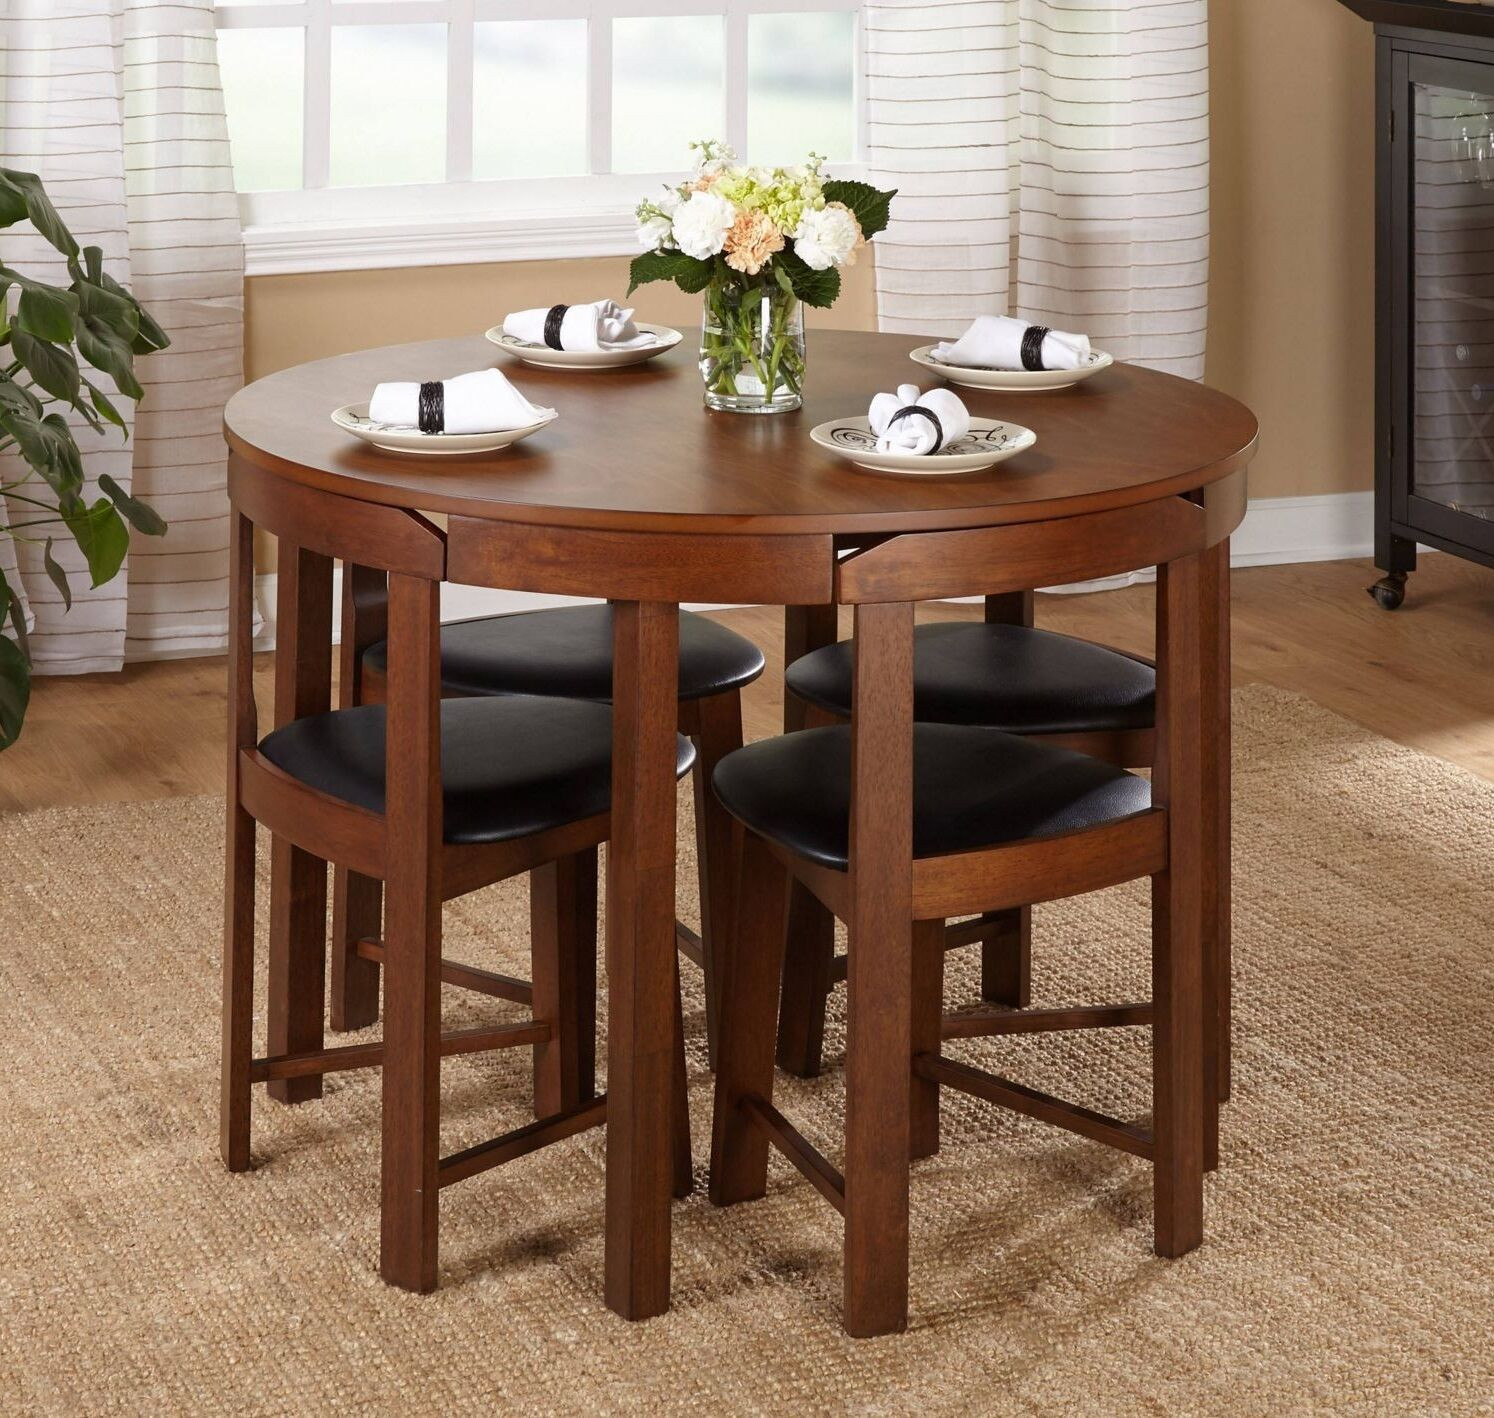 Small Kitchen Dinette Set
 Modern 5pc Dining Table Set Kitchen Dinette Chairs